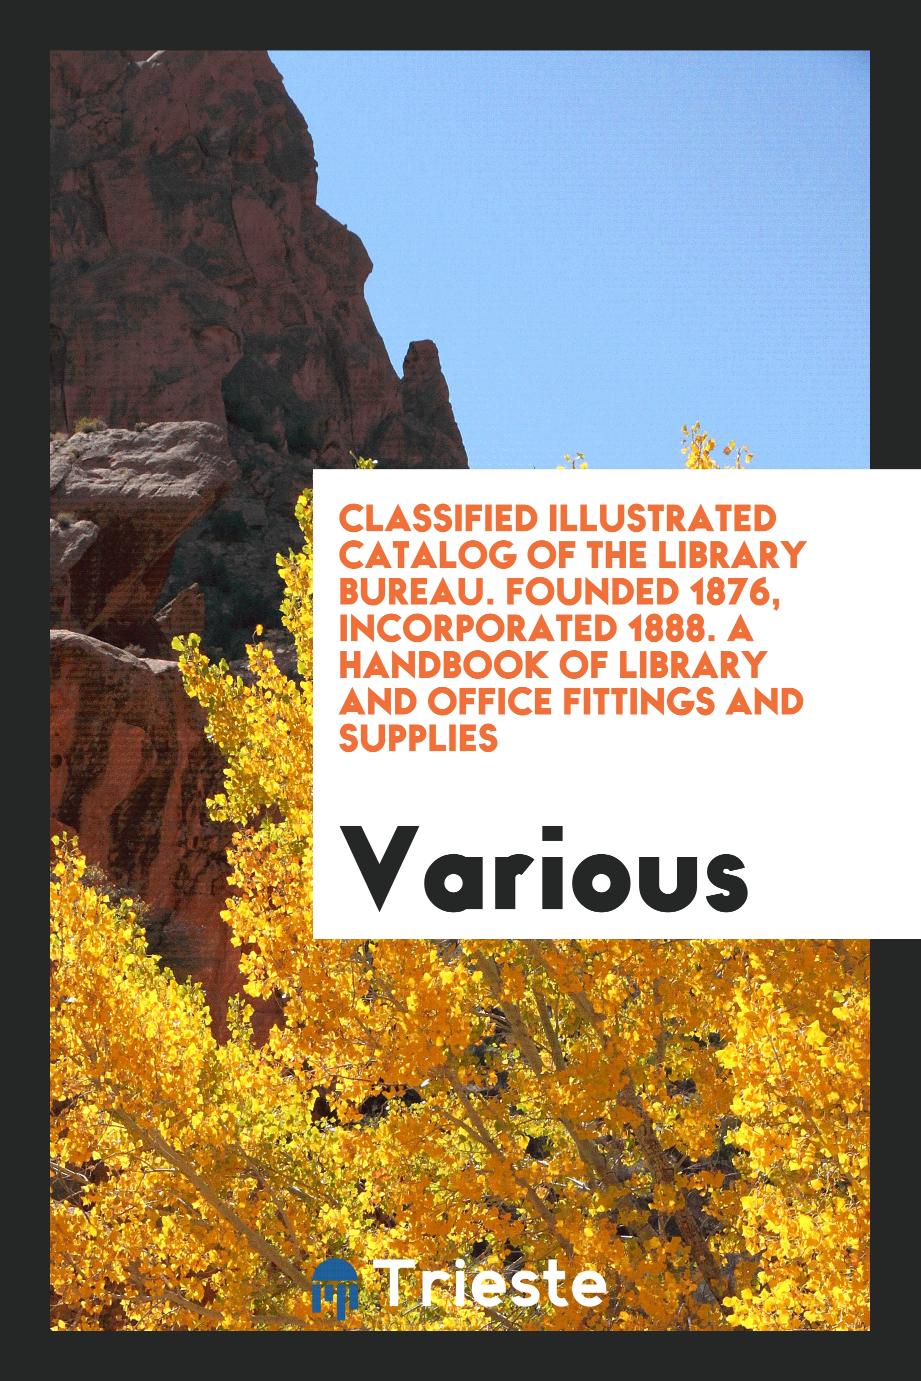 Classified Illustrated Catalog of the Library Bureau. Founded 1876, Incorporated 1888. A Handbook of Library and Office Fittings and Supplies